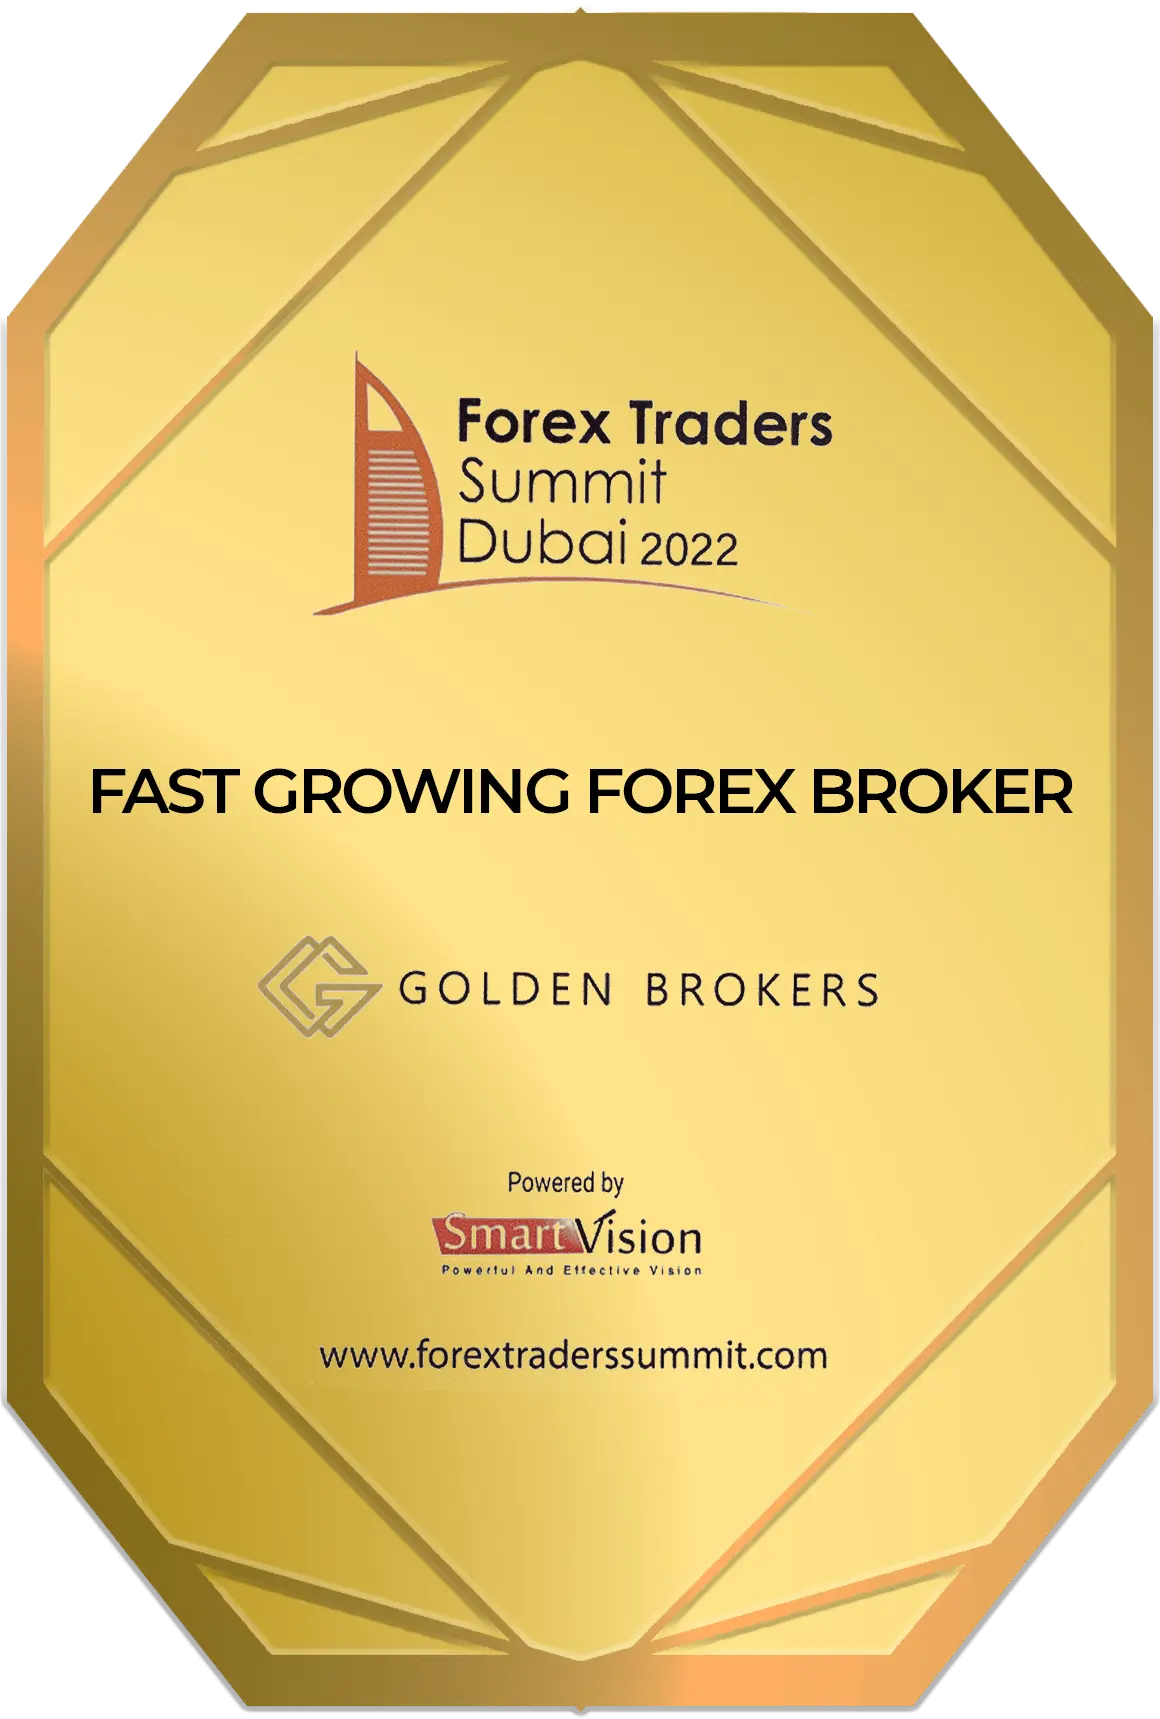 Golden Brokers Awarded Best Customer Service and Fast Growing